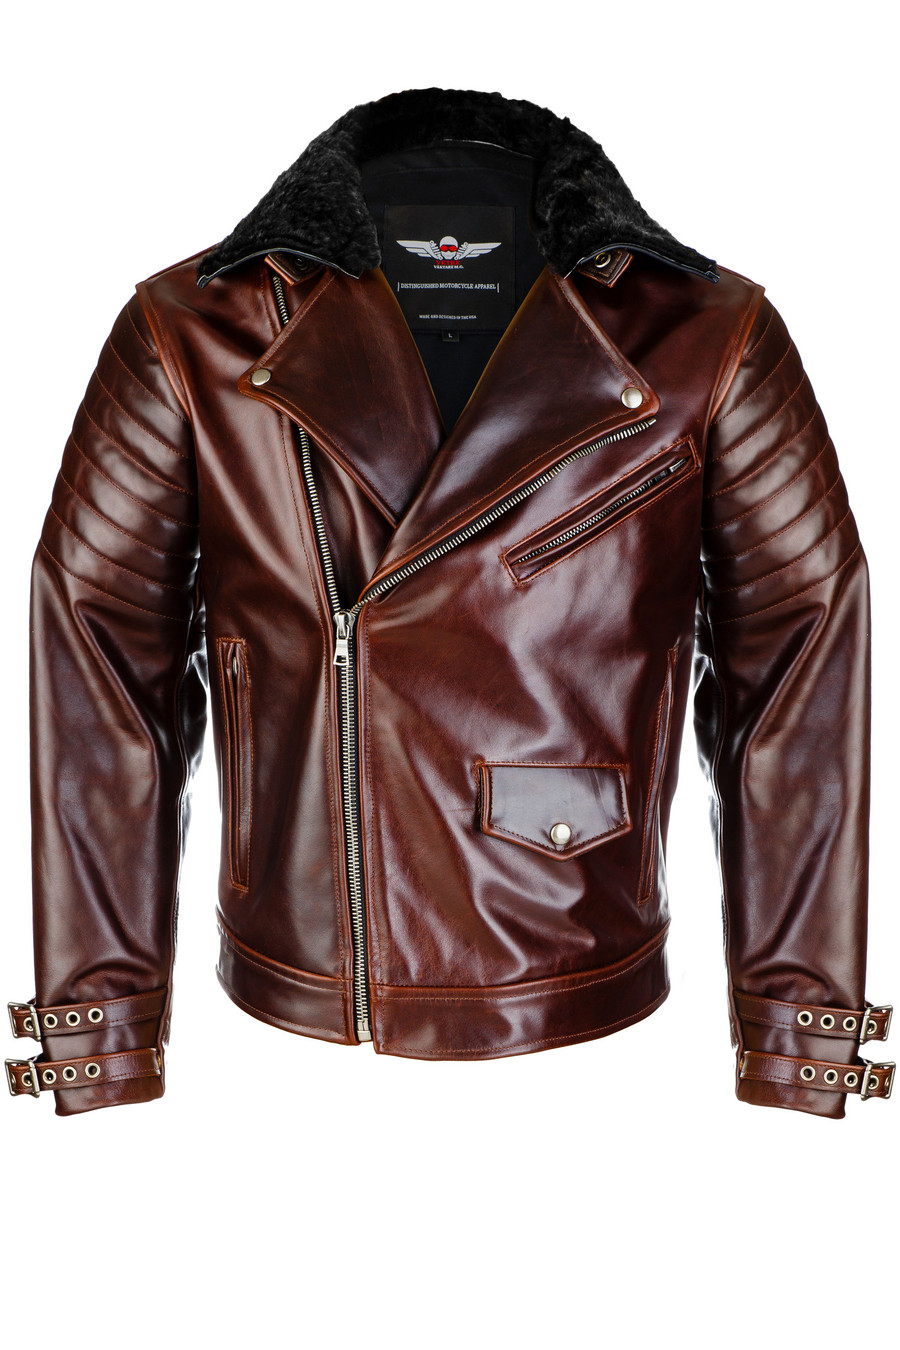 the vktre moto co vktre 1 motorcycle jacket made in the USA with detachable black shearling